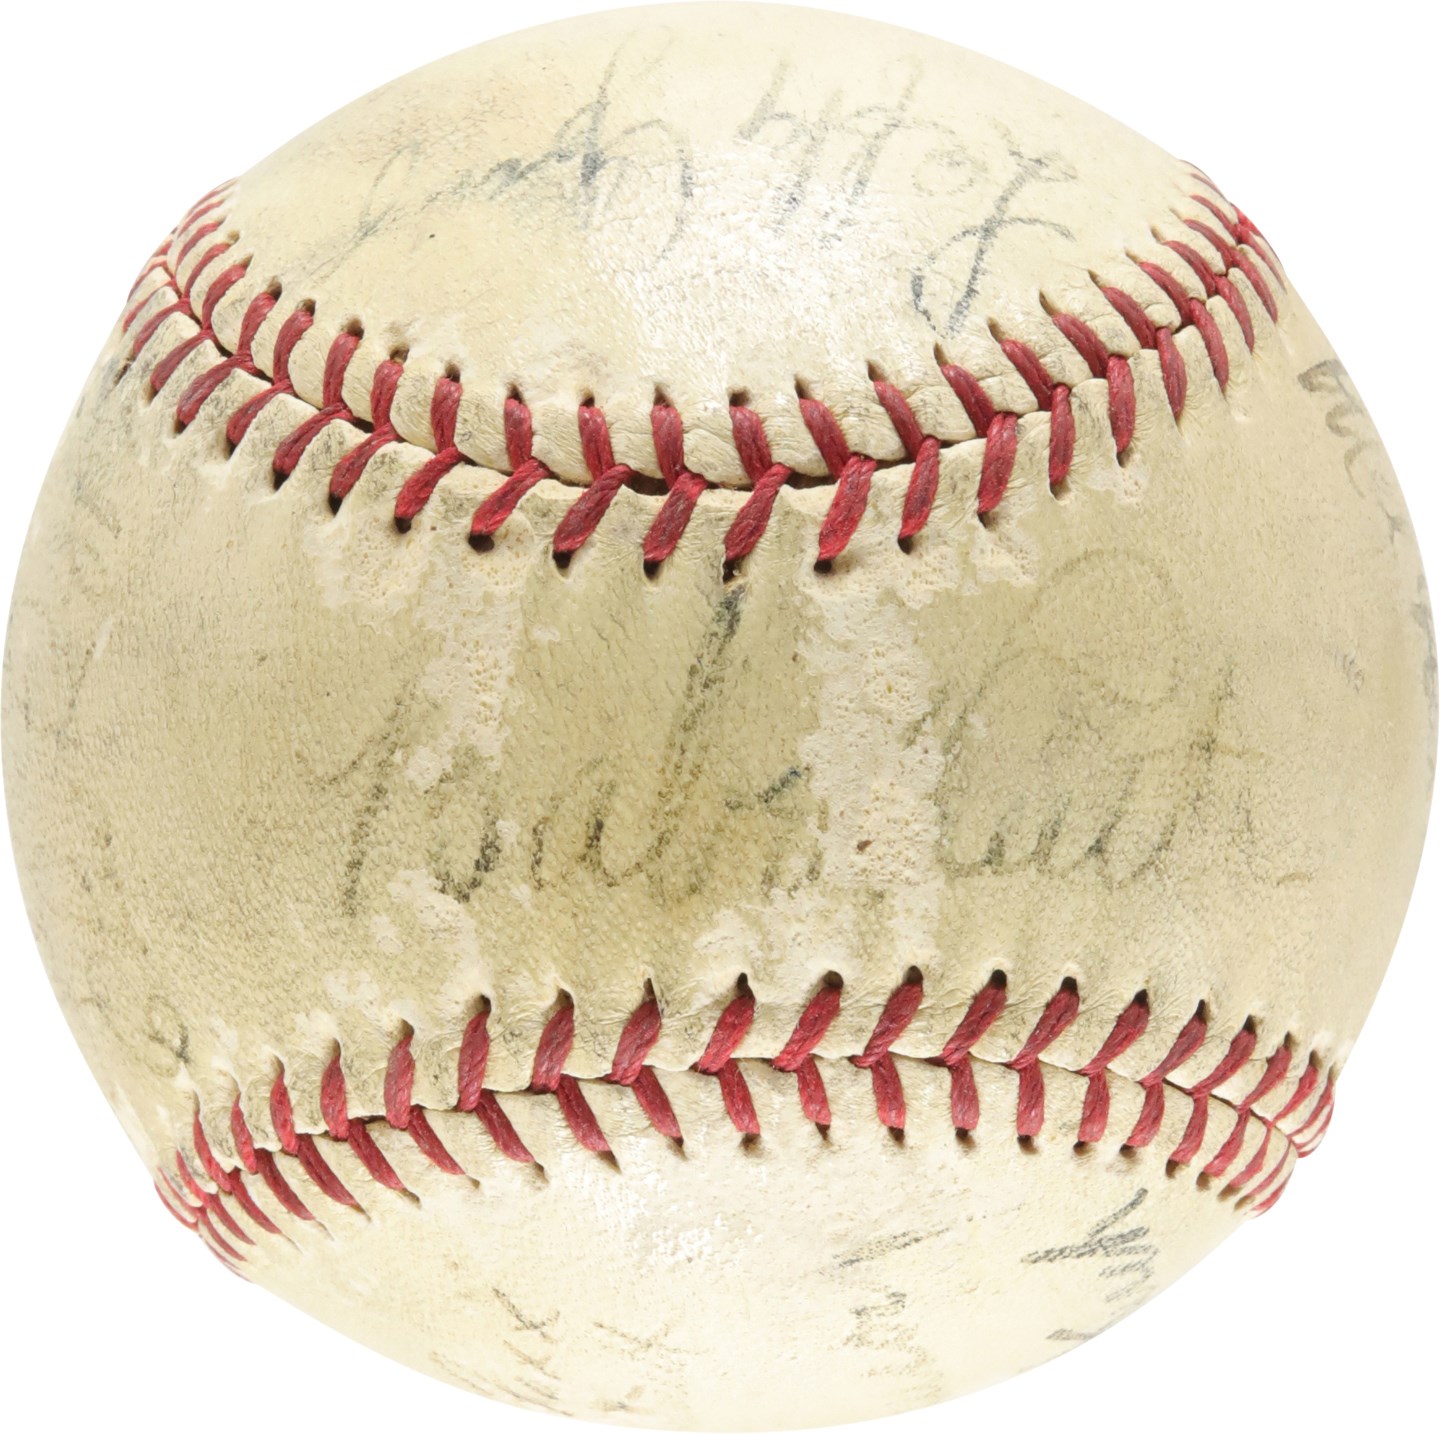 - 1934 All-Star Game Signed Baseball  - Hubbell Fans 5 in a Row - with Ruth, Gehrig, Foxx, Simmons, Cronin & W. Johnson (PSA)